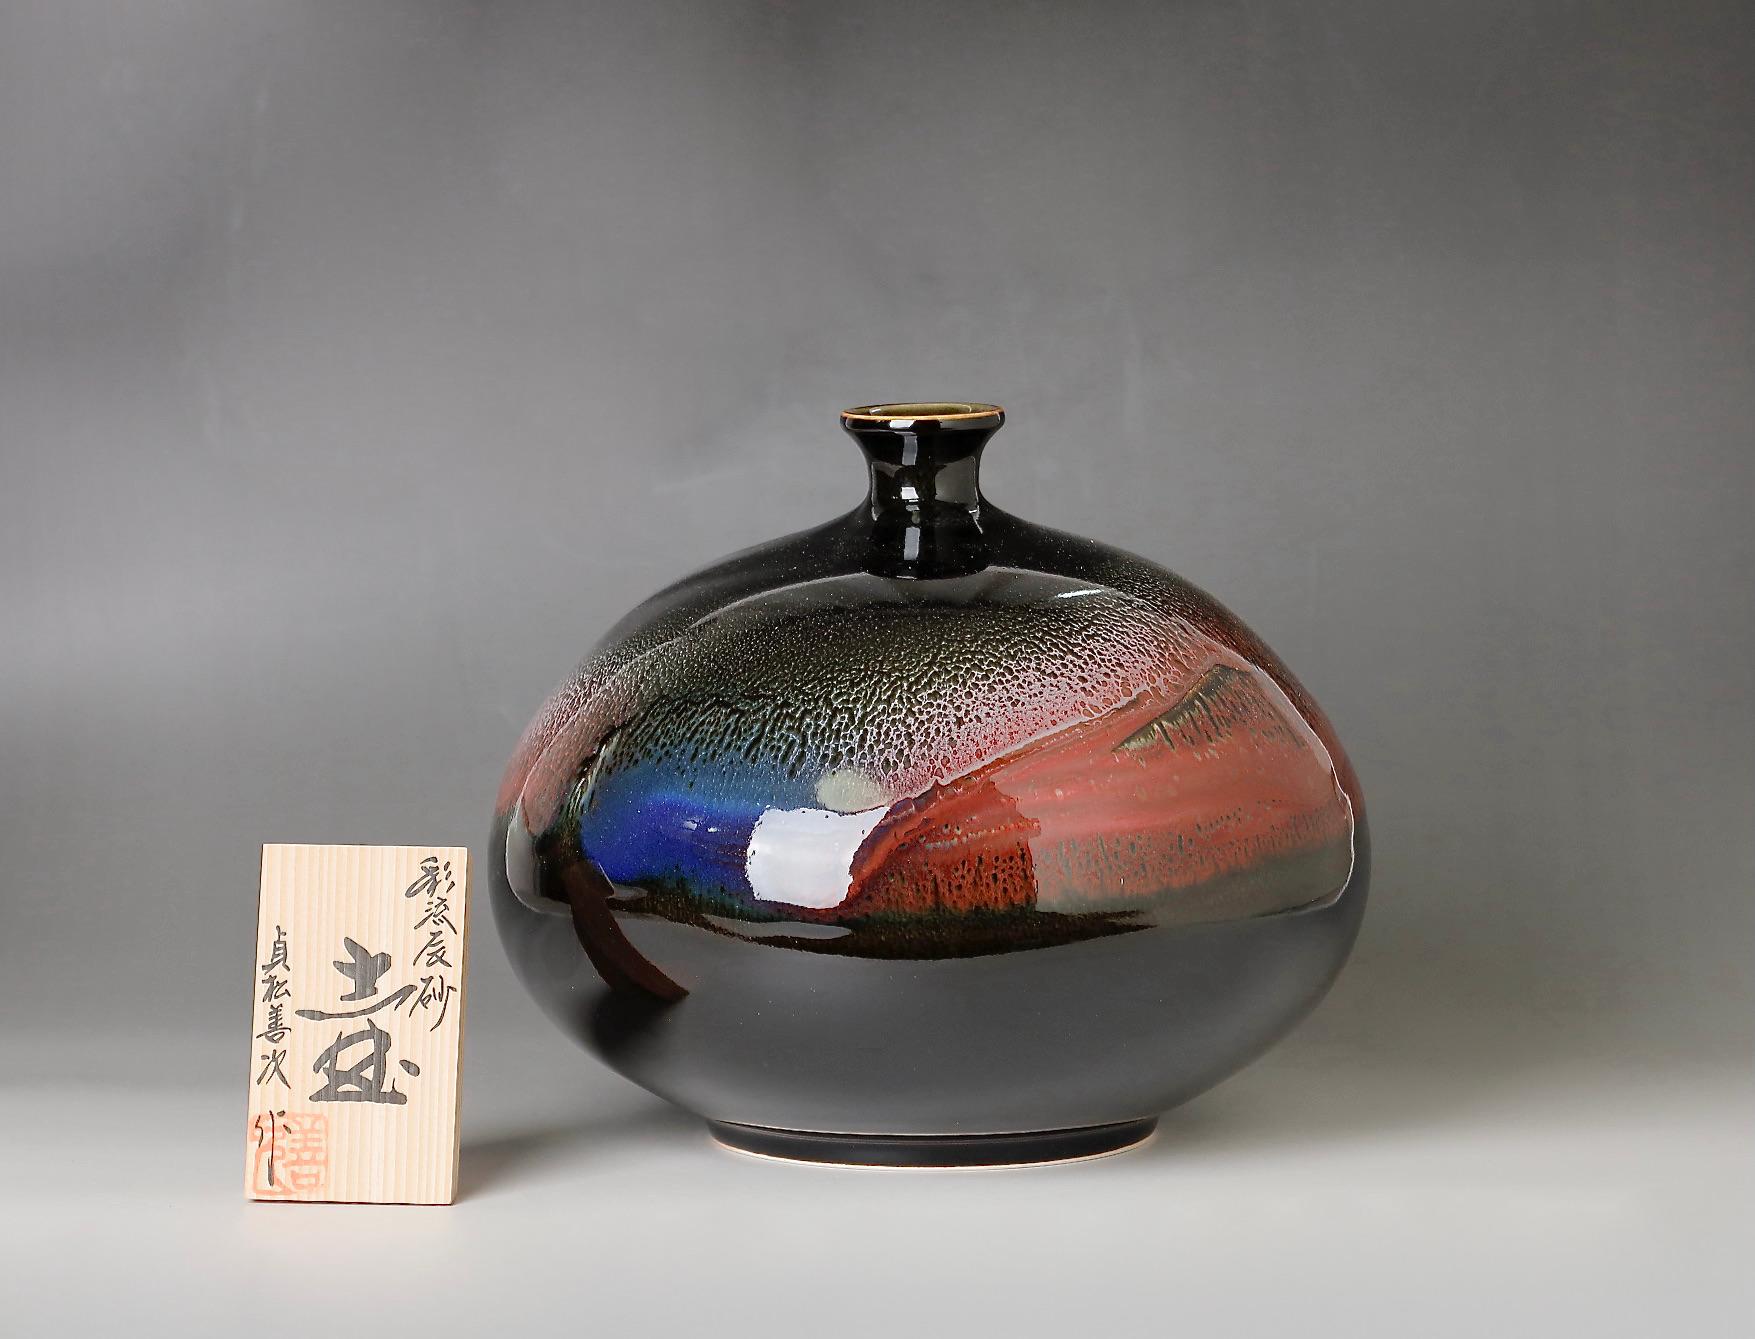 Spectacular large ceramic vase with absolutely spectacular colors by renown Nitten artist Sadamatsu Zenji (b.1948) Zenji exhibited on most prestigious Nitten show for 14 years winning numerous awards. Known for highest quality work with spectacular